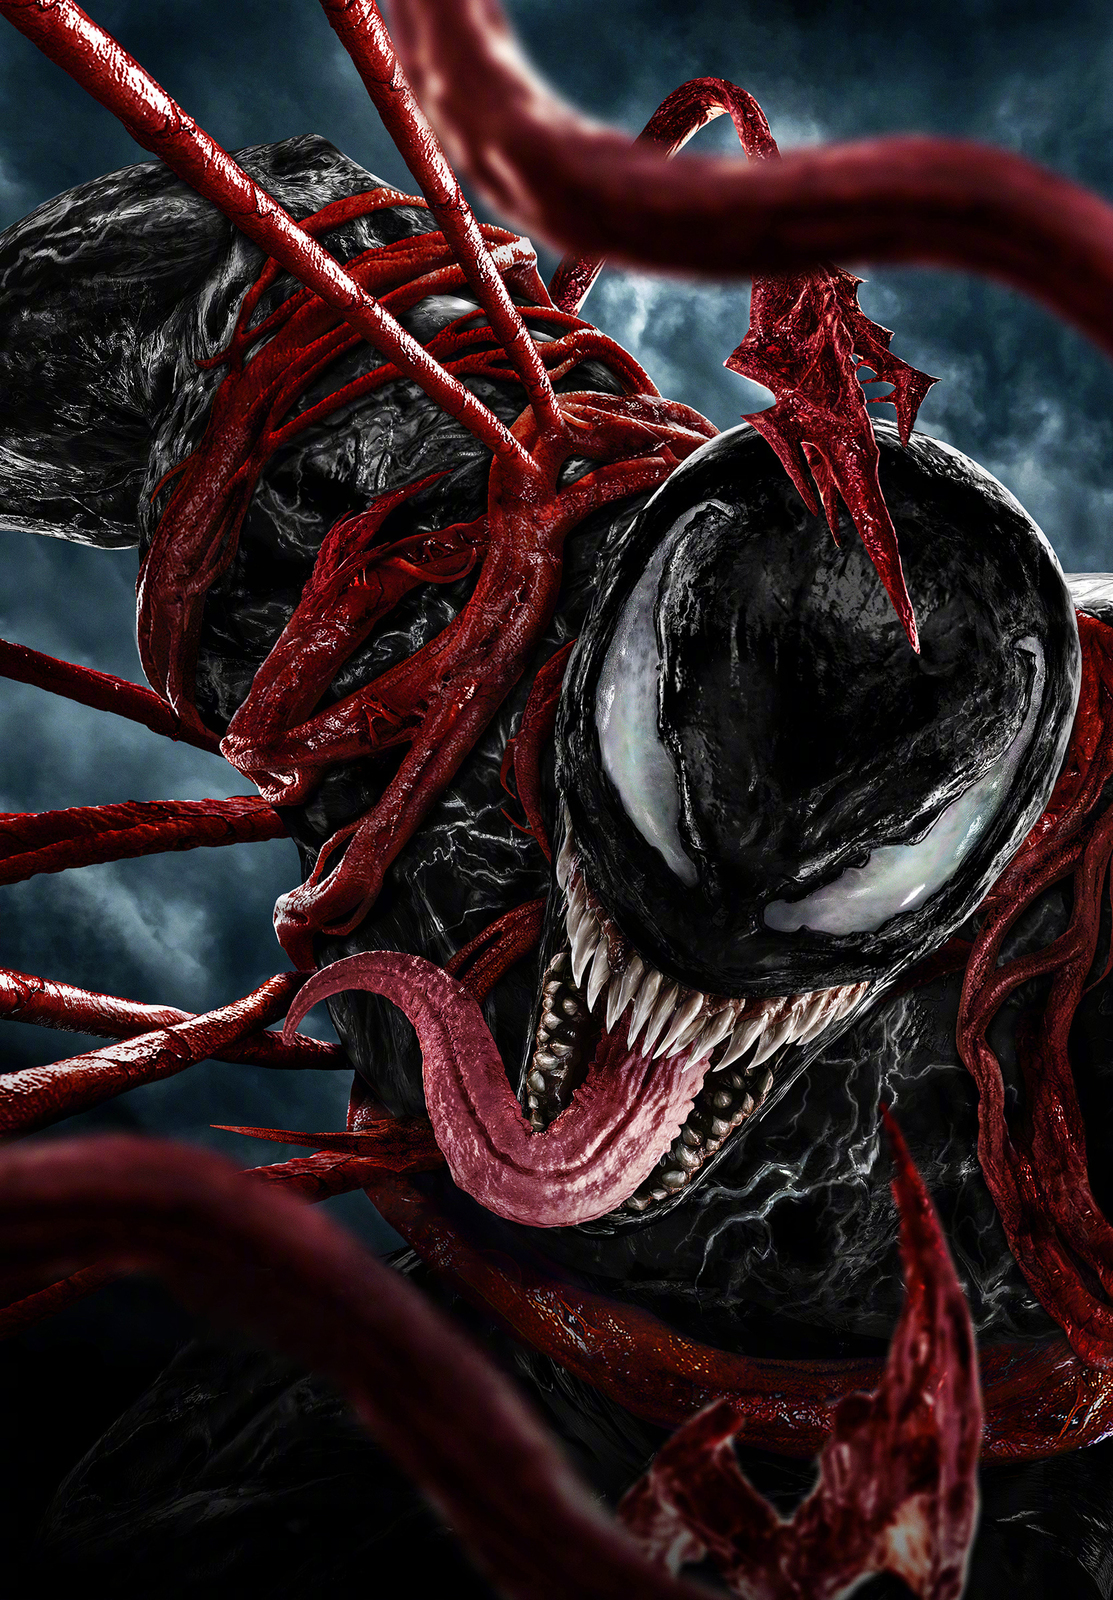 Venom Let There Be Carnage Poster Marvel Movie Textless Art Print 24x36 27x40